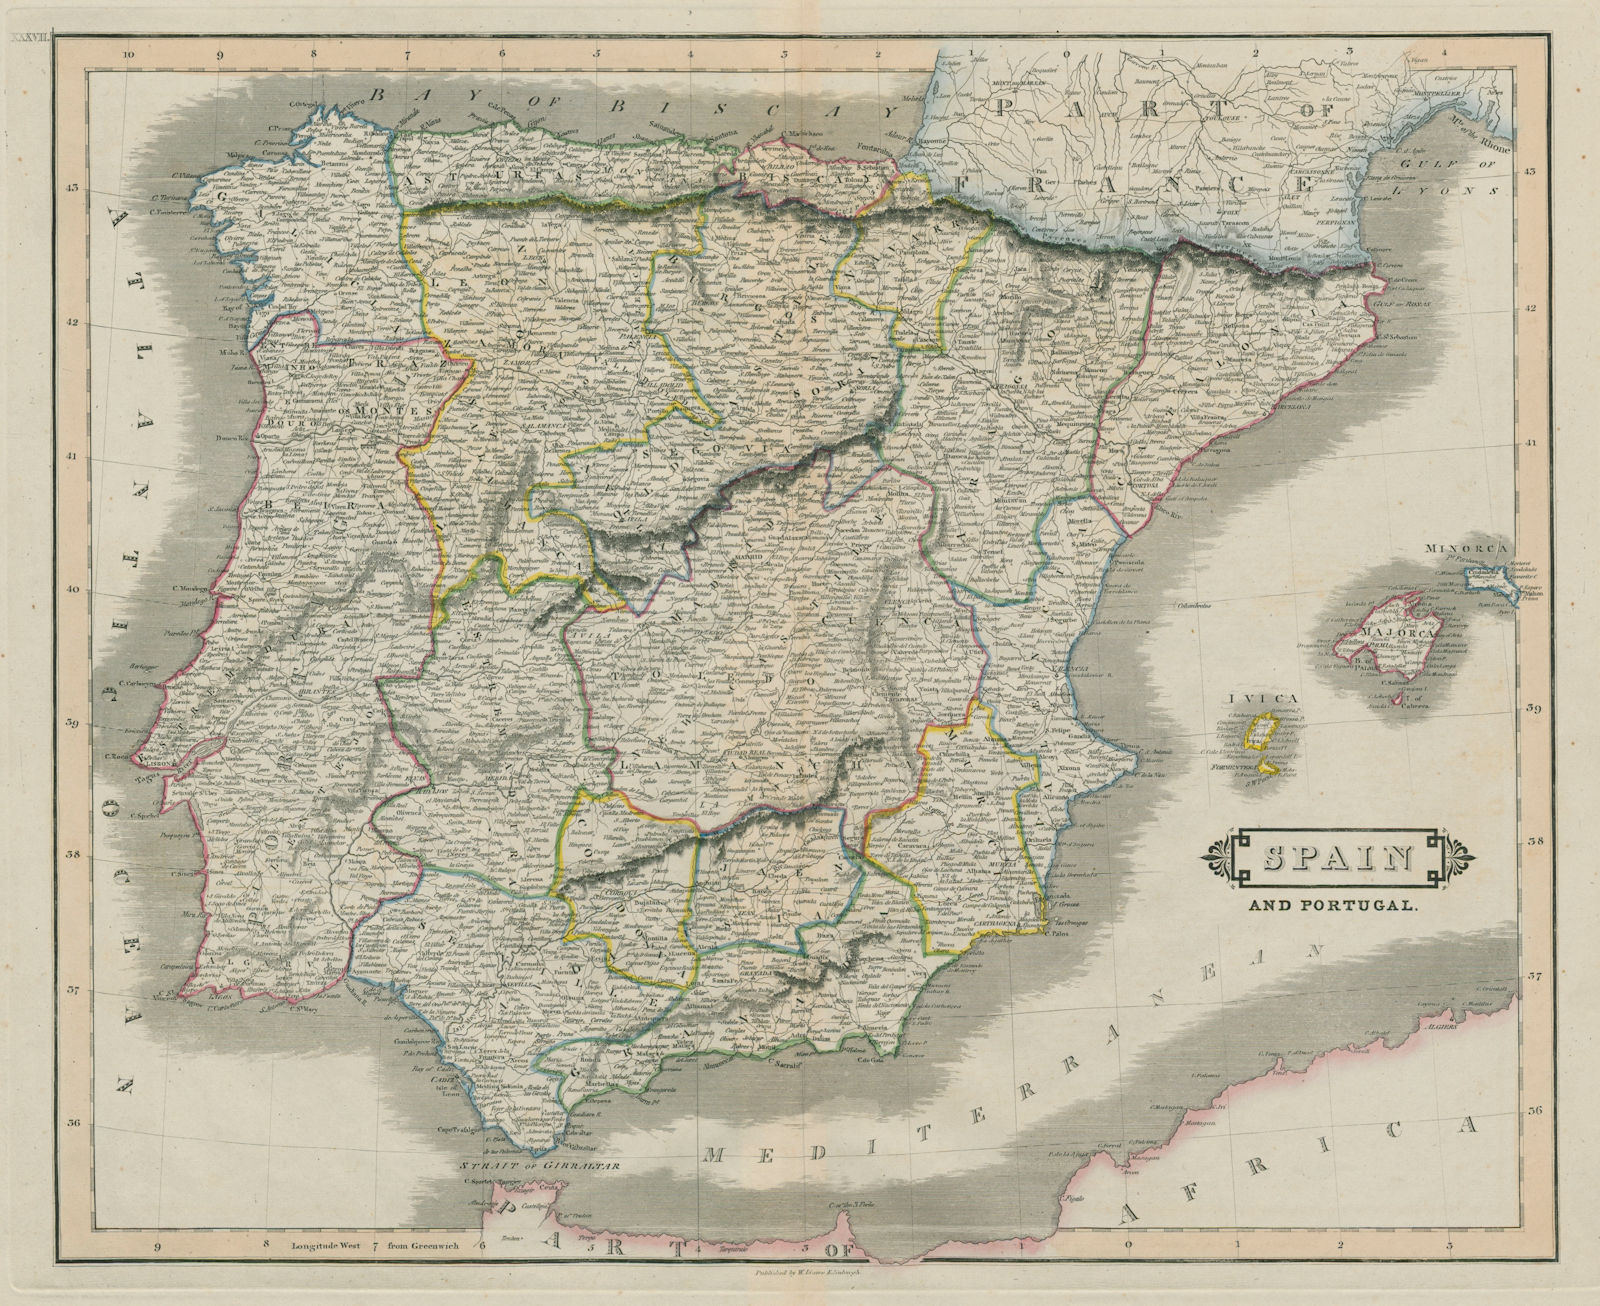 Associate Product Spain and Portugal. Iberia. LIZARS 1842 old antique vintage map plan chart